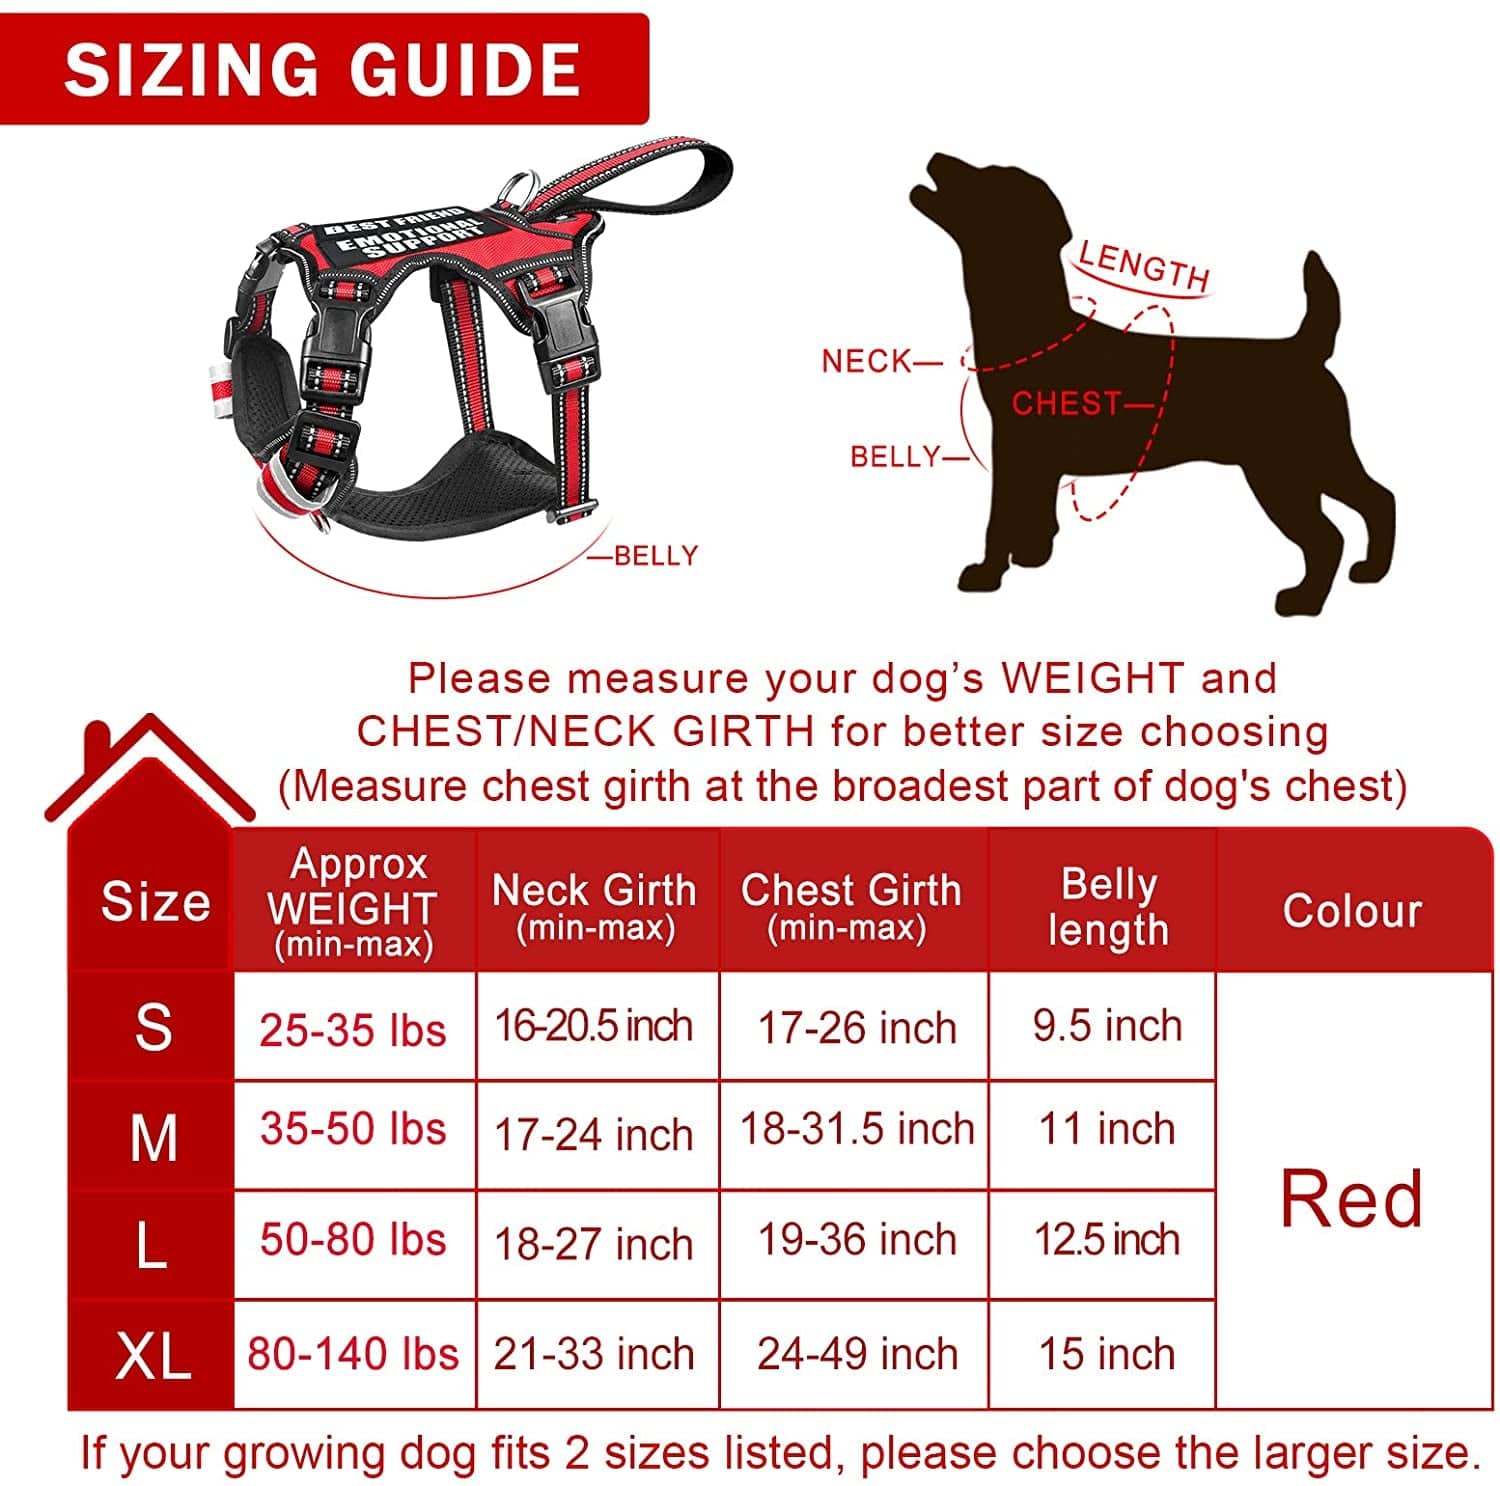 WINSEE Service Dog Vest No Pull Dog Harness with 7 Dog Patches, Reflective Pet Harness with Durable Soft Padded Handle for Training Small, Medium, Large, and Extra-Large Dogs (Large, Red) Animals & Pet Supplies > Pet Supplies > Dog Supplies > Dog Apparel WINSEE   